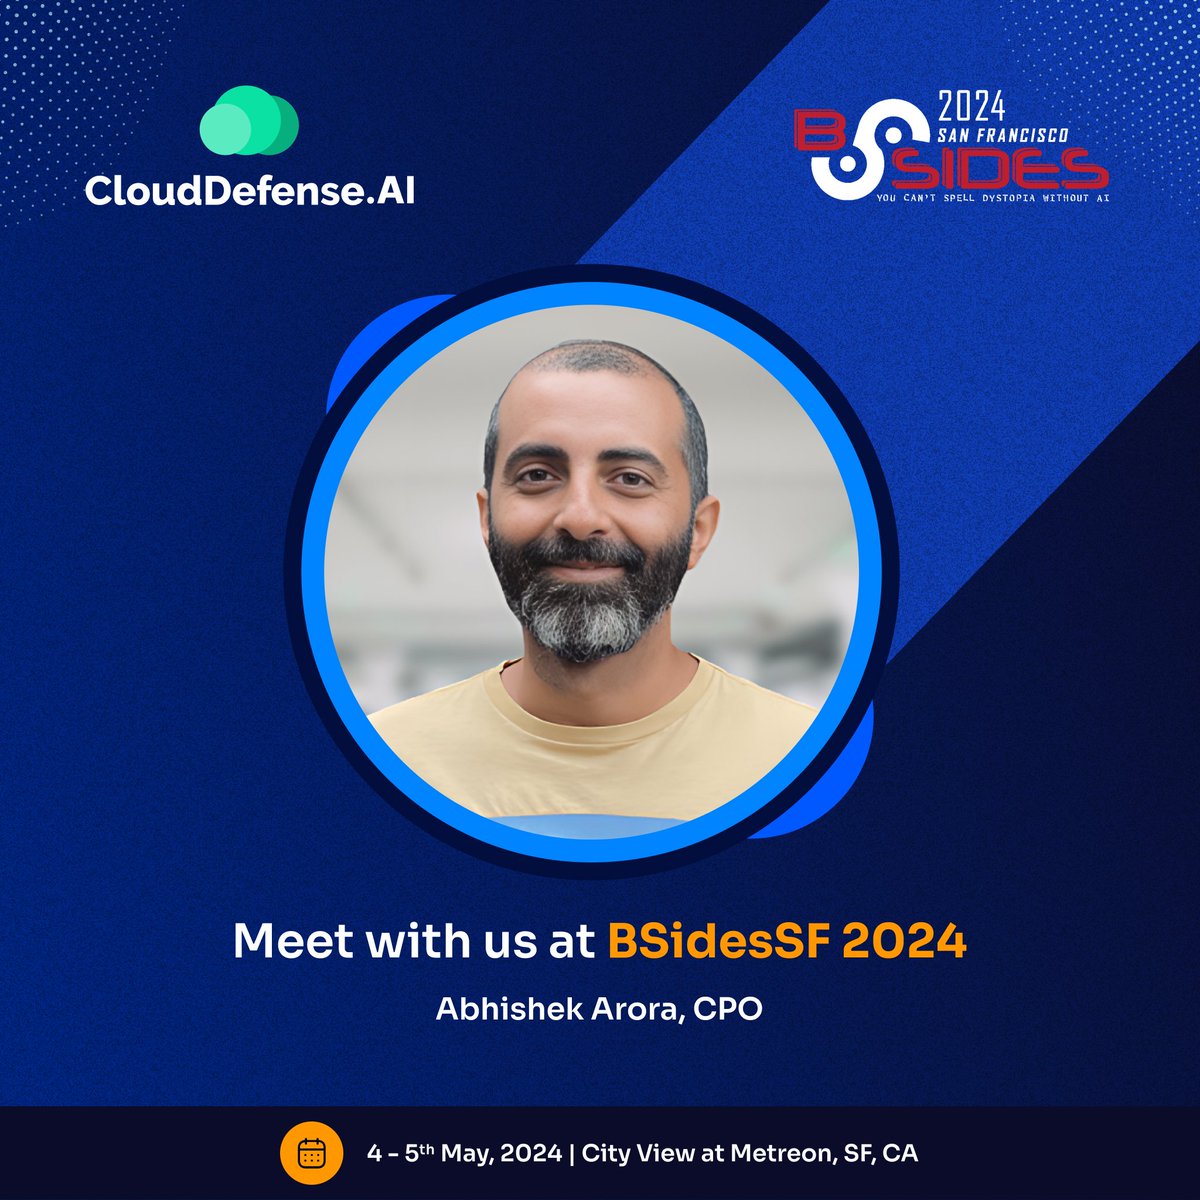 Our CPO Abhi Arora is gearing up to rock BSidesSF 2024!

🗓️ Date: May 4-5, 2024
📍 Location: City View at Metreon, San Francisco, California.

For more information, visit: go.clouddefense.ai/BSidesSF

#CloudDefenseAI #BSidesSF2024 #Cybersecurity #InfoSec #Networking  #TechEvents